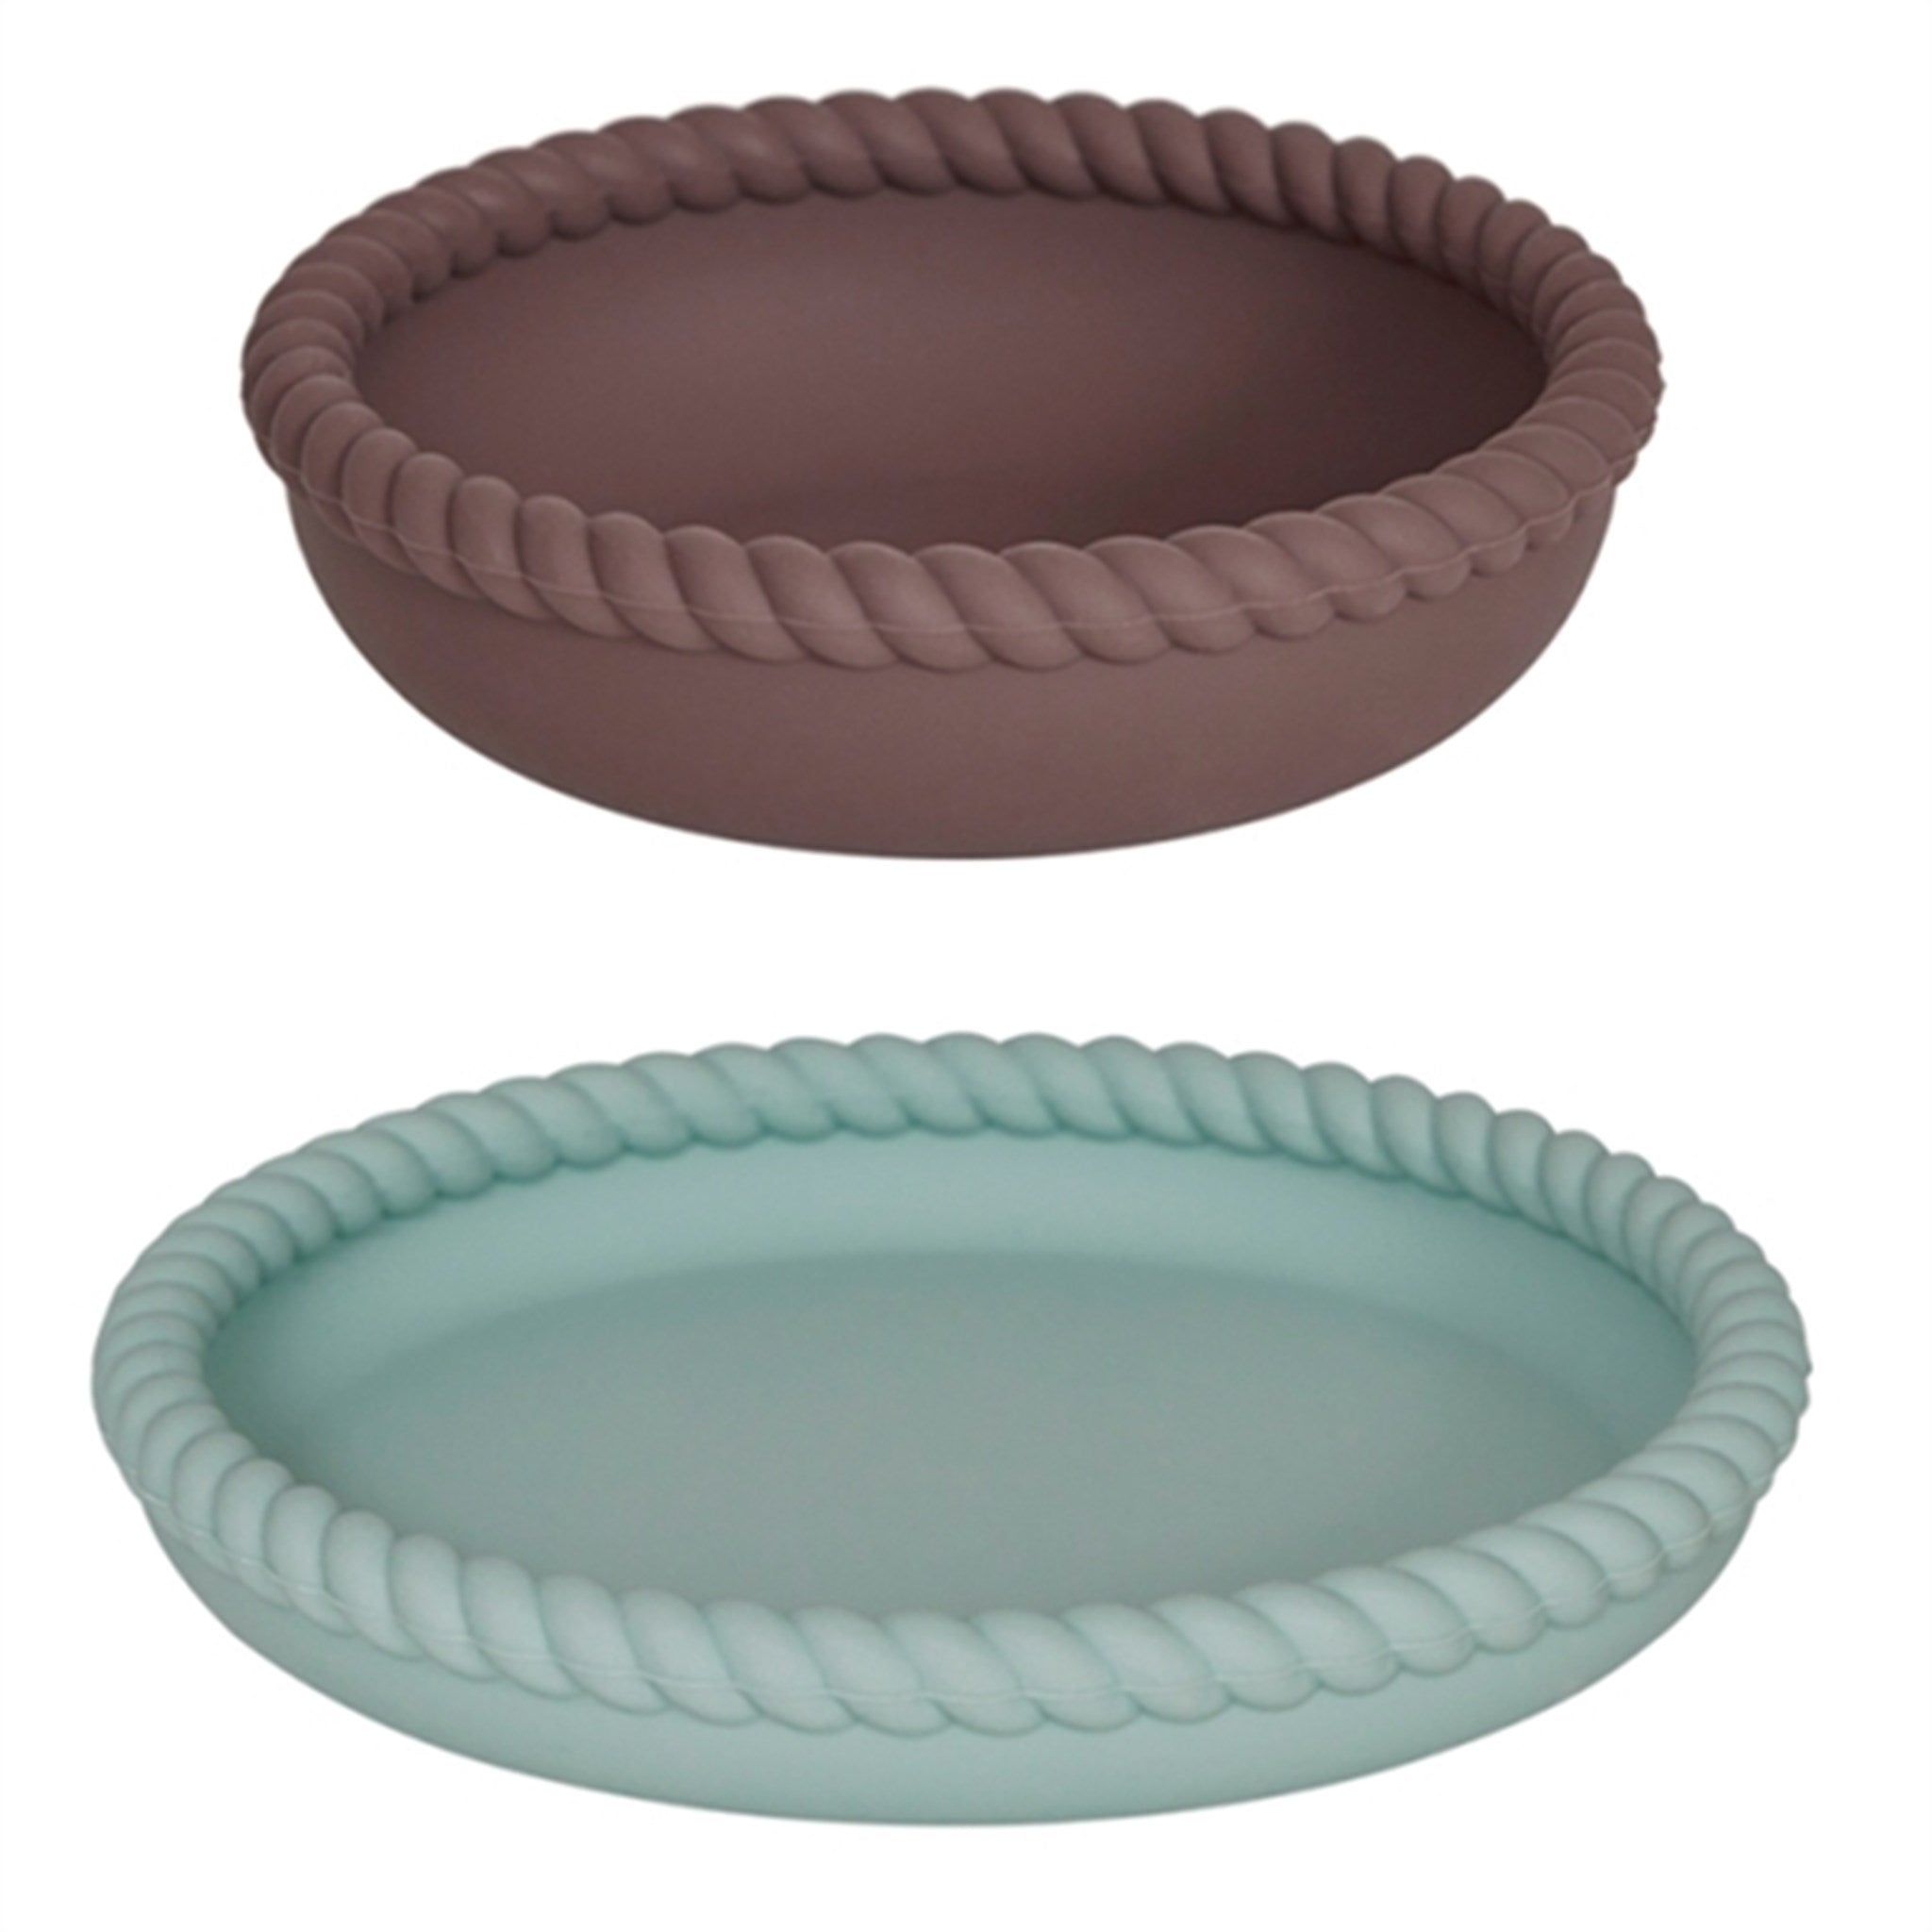 OYOY Mellow Plate And Bowl Pale Mint/Choko